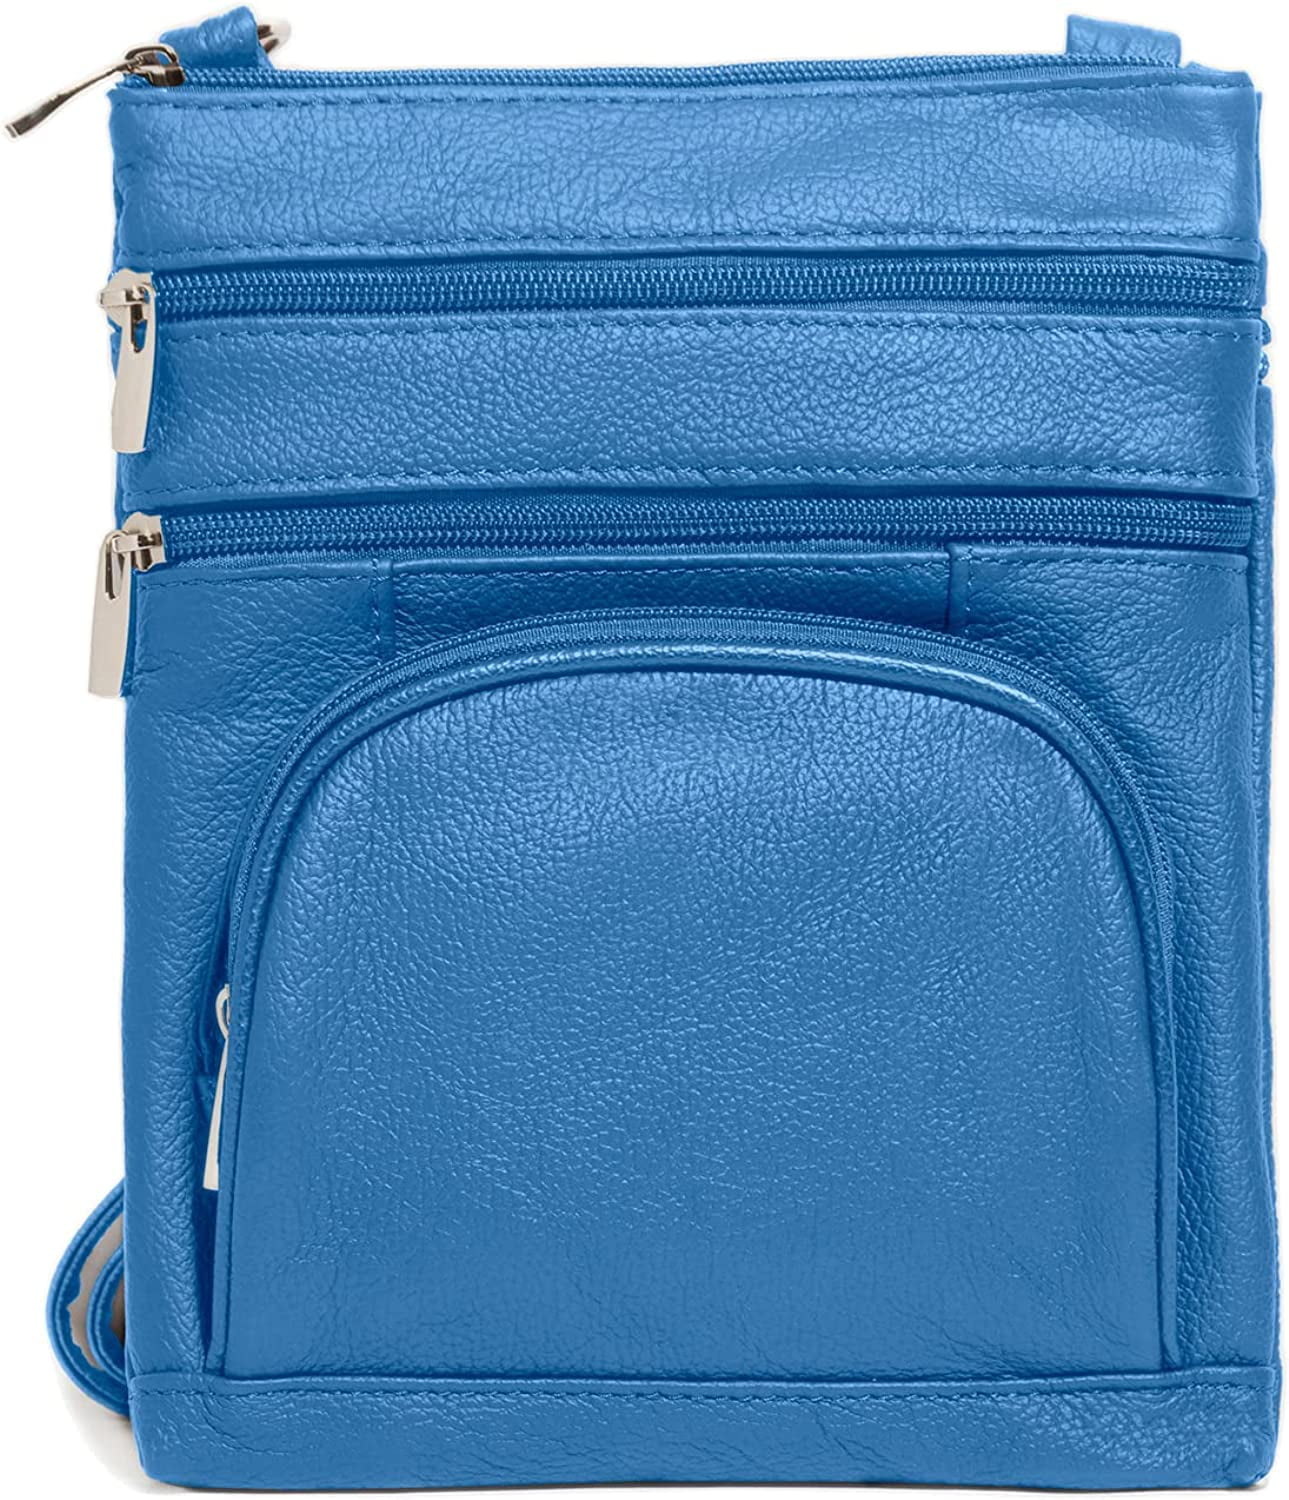 Small Cowhide Leather Crossbody Purse Shoulder Strap Bag for Women, Blue